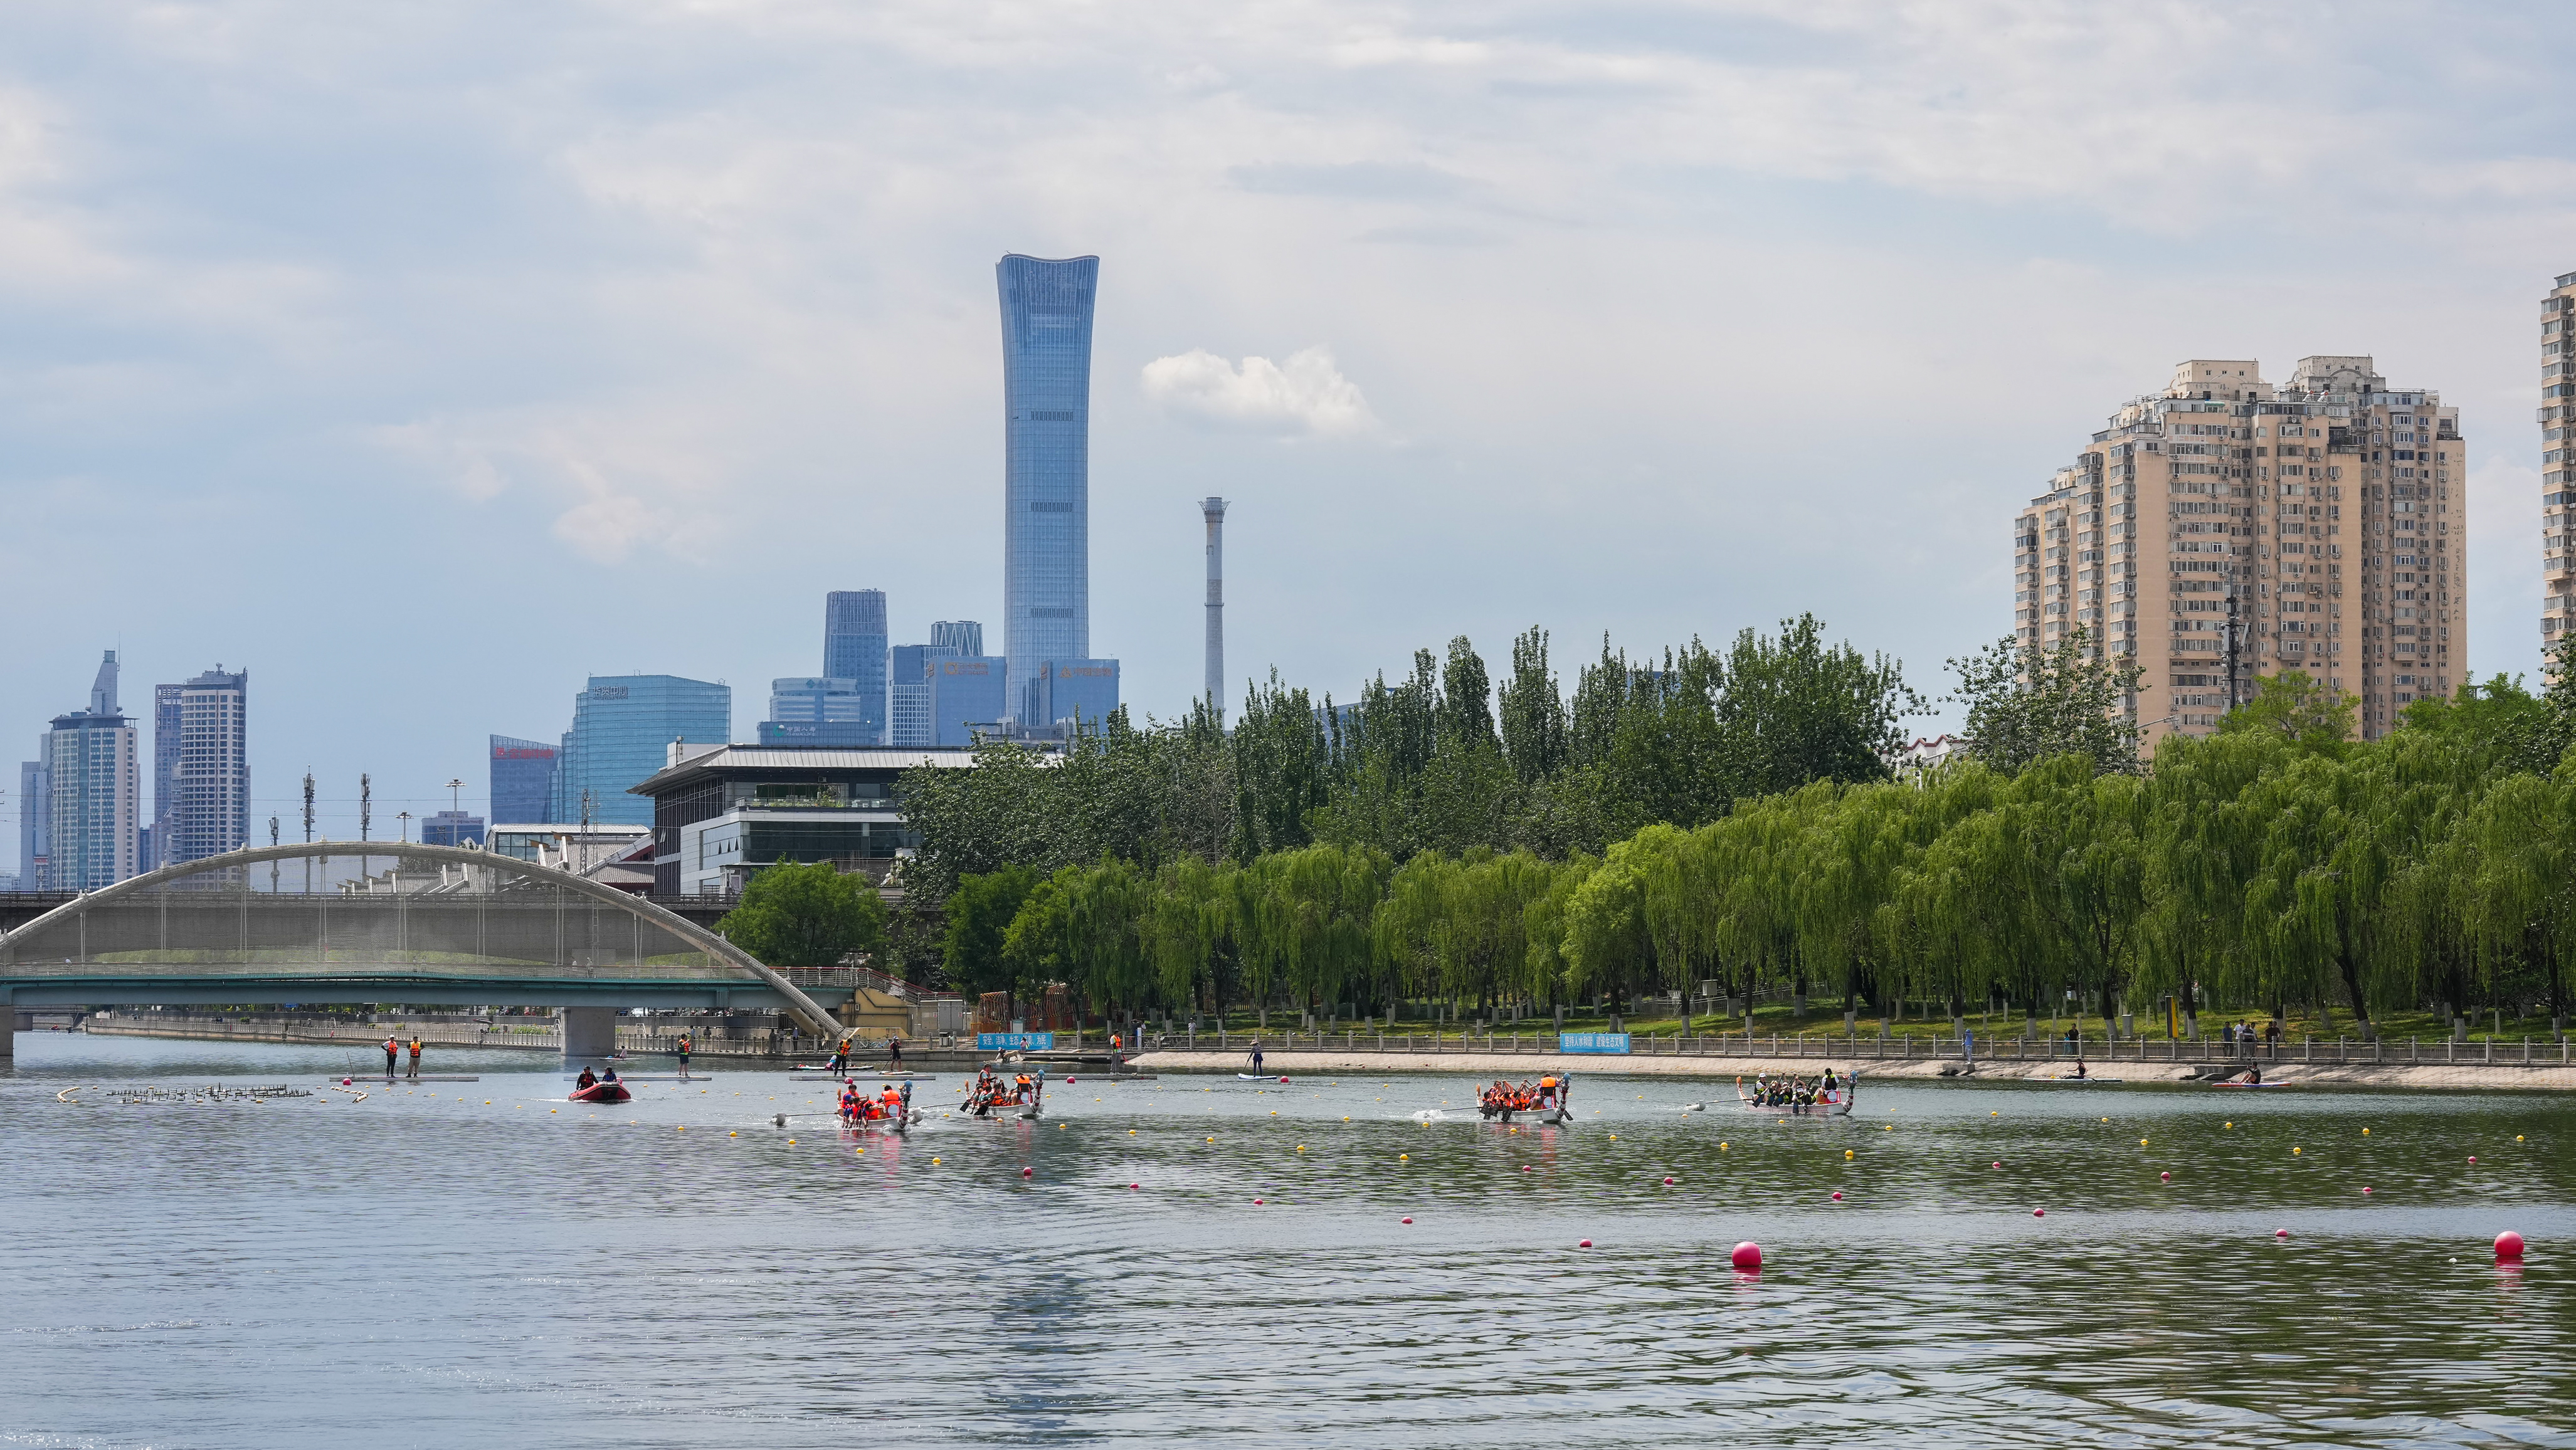 The 11th Capital University Dragon Boat Race takes place